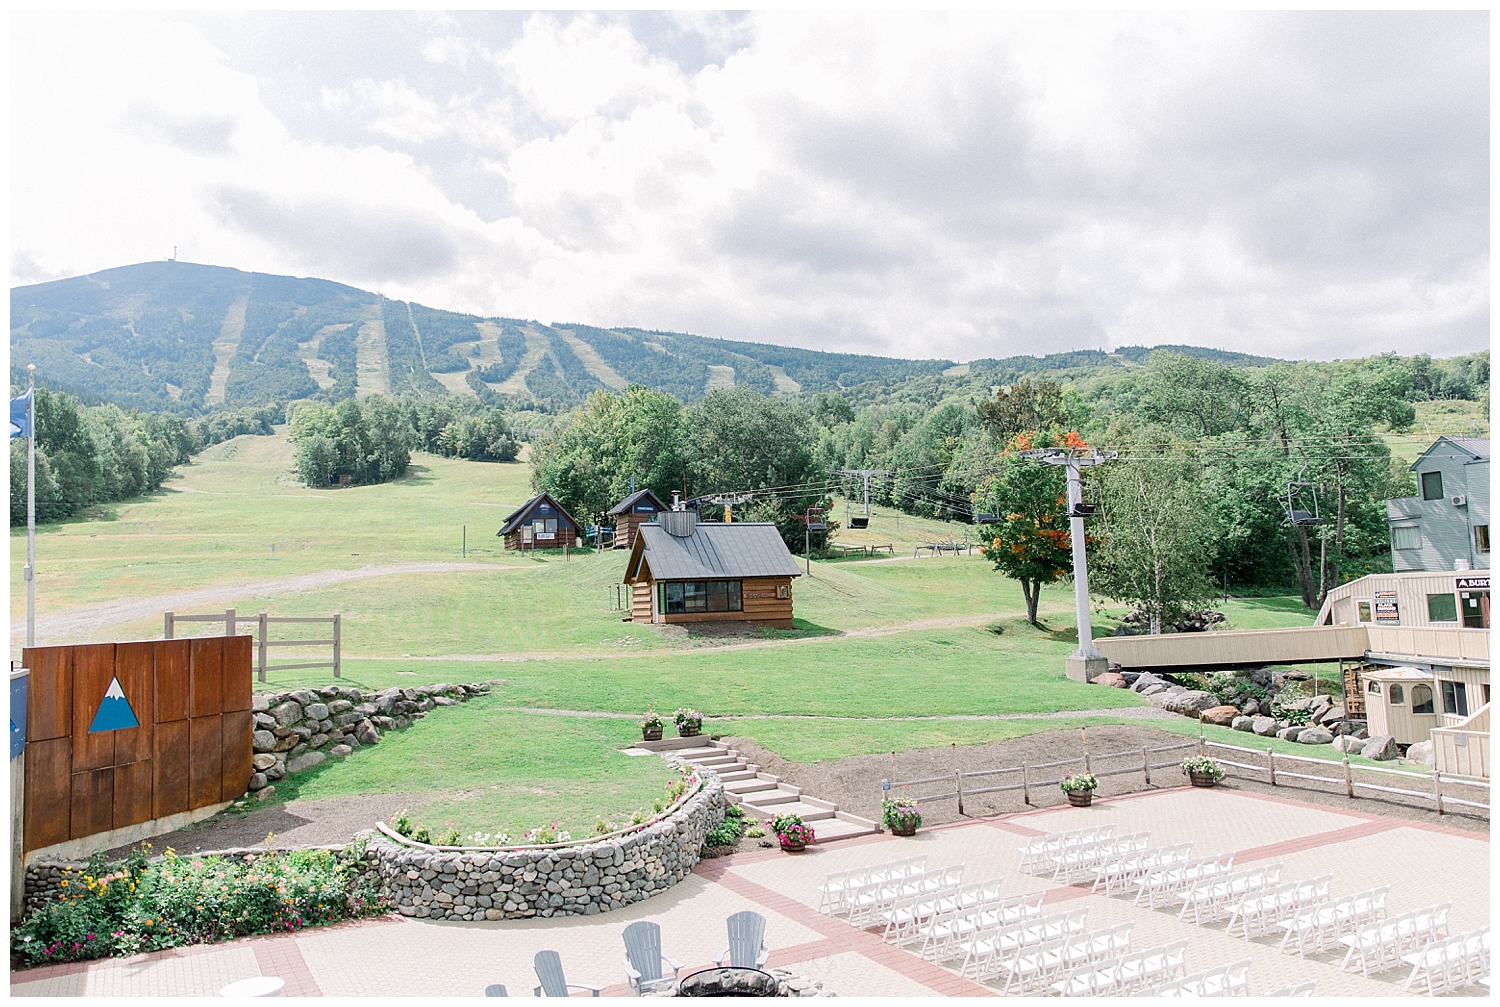 Outdoor ceremony setup at a Sugarloaf Mountain Resort Wedding in Maine, photos by Halie Olszowy.